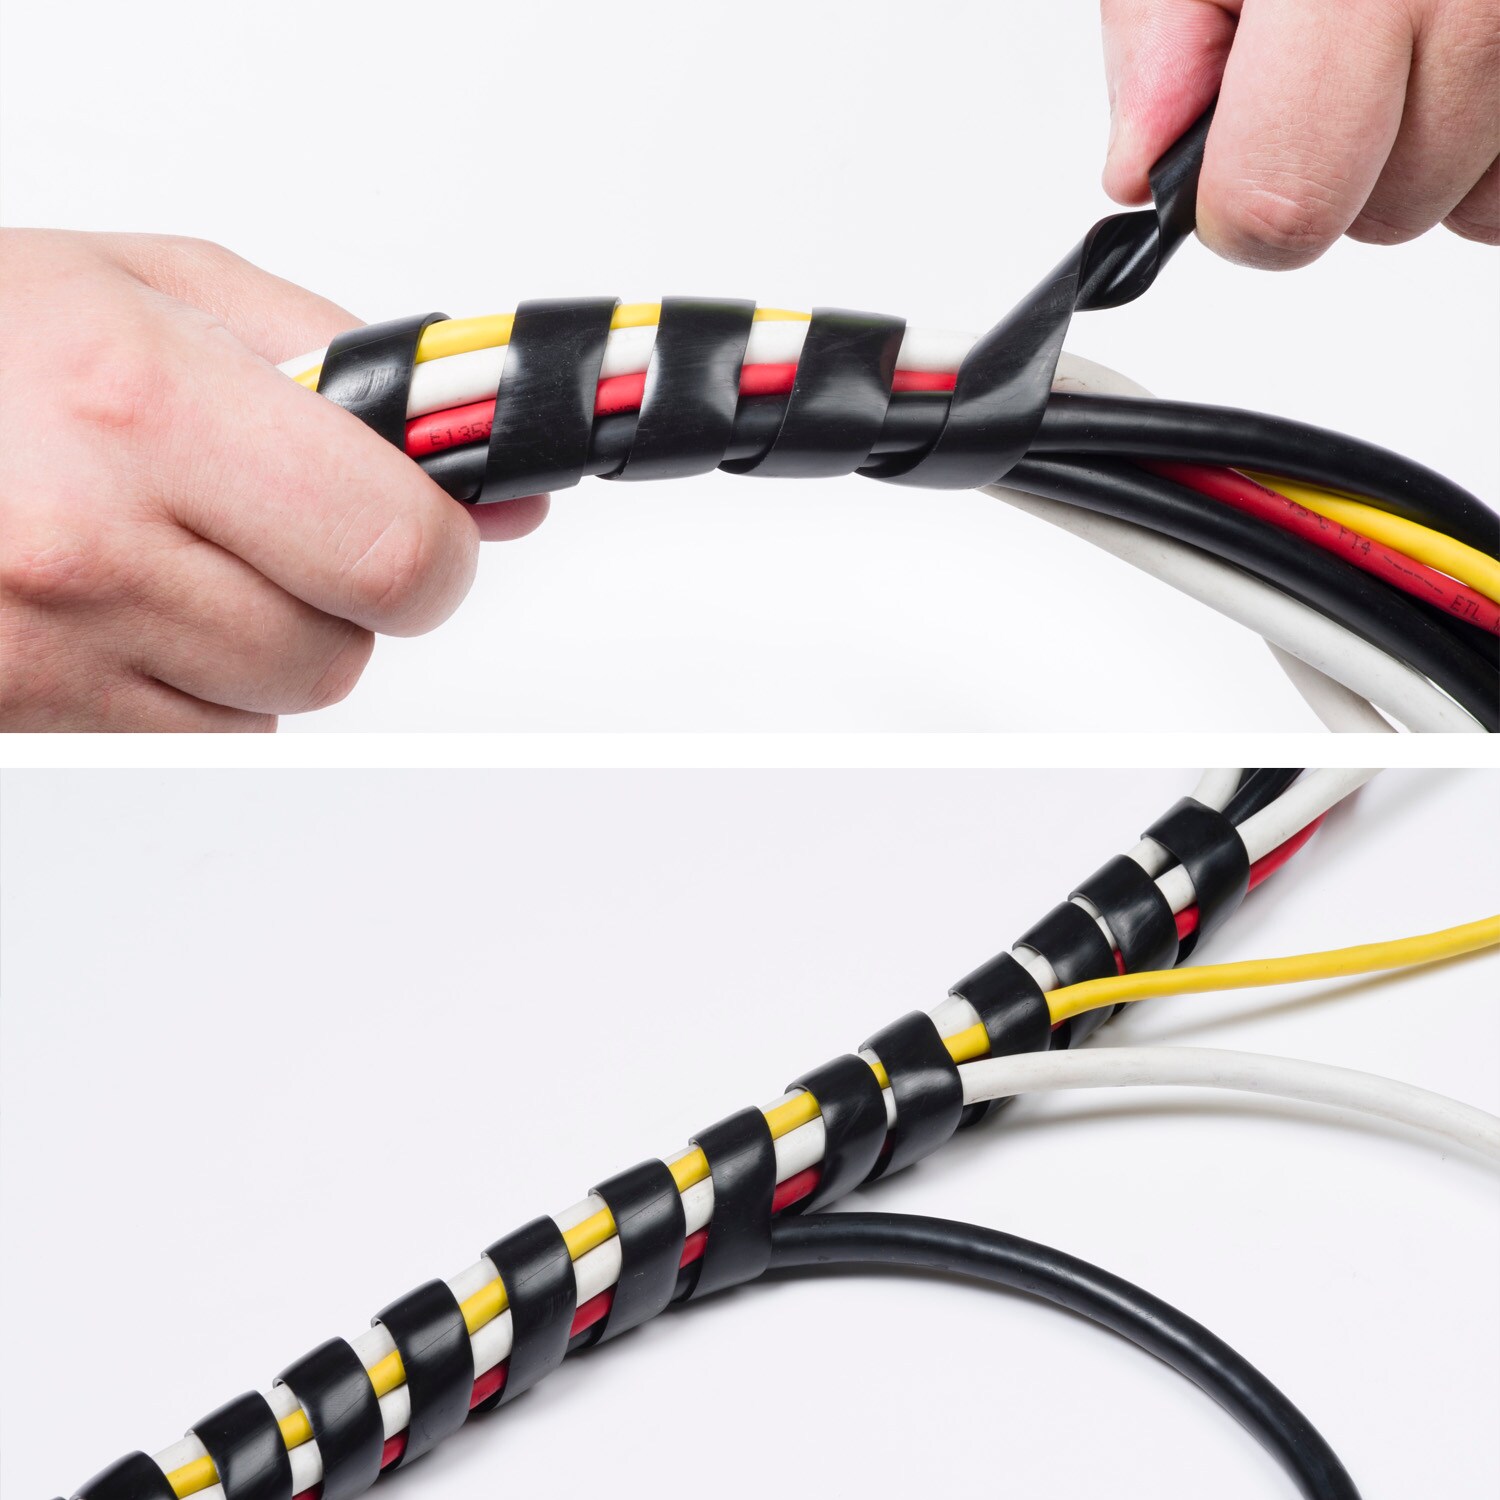 Tidy Cables 2.5m Length Cords & Wires in Home/Office Black expands Around Cables 10-40mm D-Line CTW2.5B Cable Management Wrap Cable Organiser 